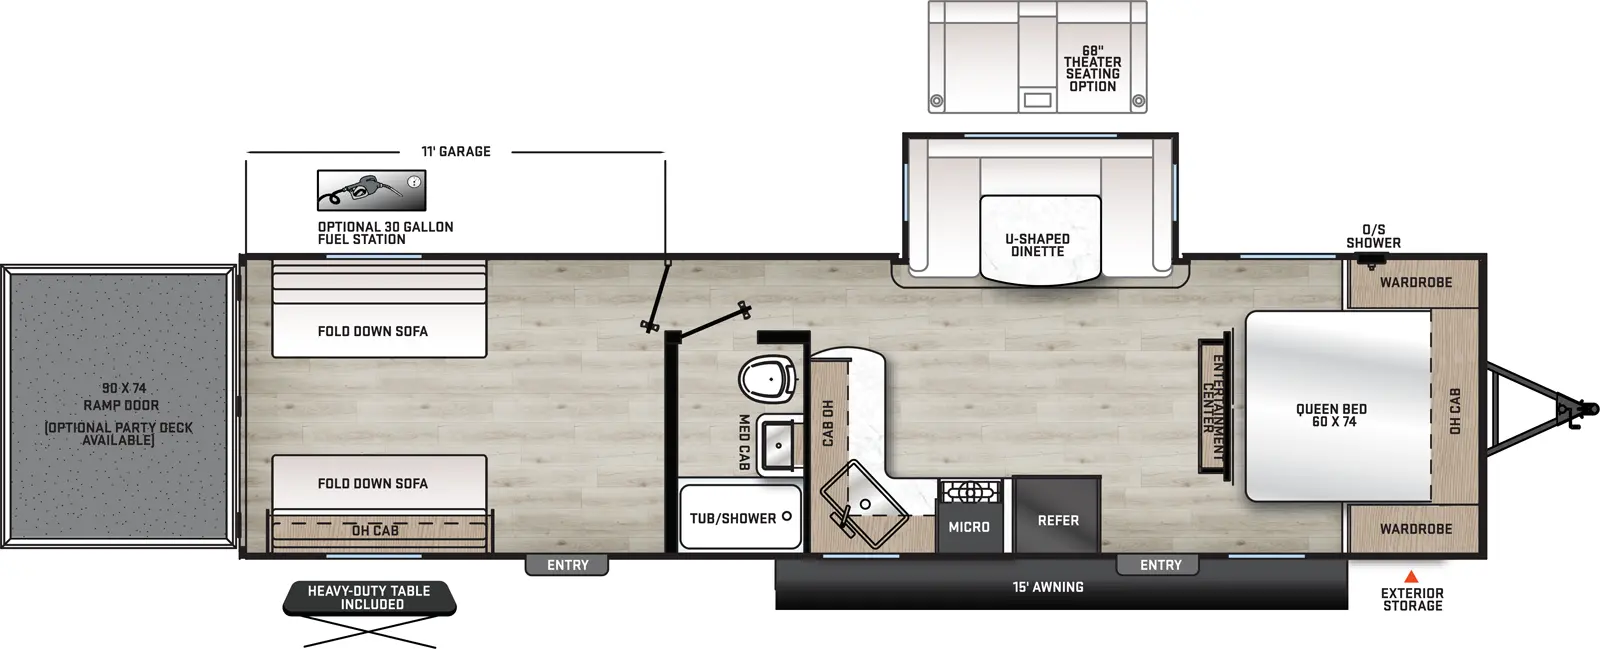 The 29THS has one slide out two entry doors. Exterior features include a 15 foot awning, front exterior storage, outside shower, heavy-duty table, and rear ramp door. Interior layout front to back: foot facing queen bed with overhead cabinet and wardrobes on either side; island entertainment center along inner wall; off-door side u-dinette slide out; door side entry, refrigerator, cook top stove, microwave, corner sink, overhead cabinet, and counter that wraps to inner wall; door side full bathroom with medicine cabinet; rear garage with opposing fold-down sofas with overhead cabinet on door side, and second entry. Optional 30 gallon fuel station available. Optional party deck available on rear ramp door. Garage Dimensions: 132 inches from rear ramp to bathroom wall.